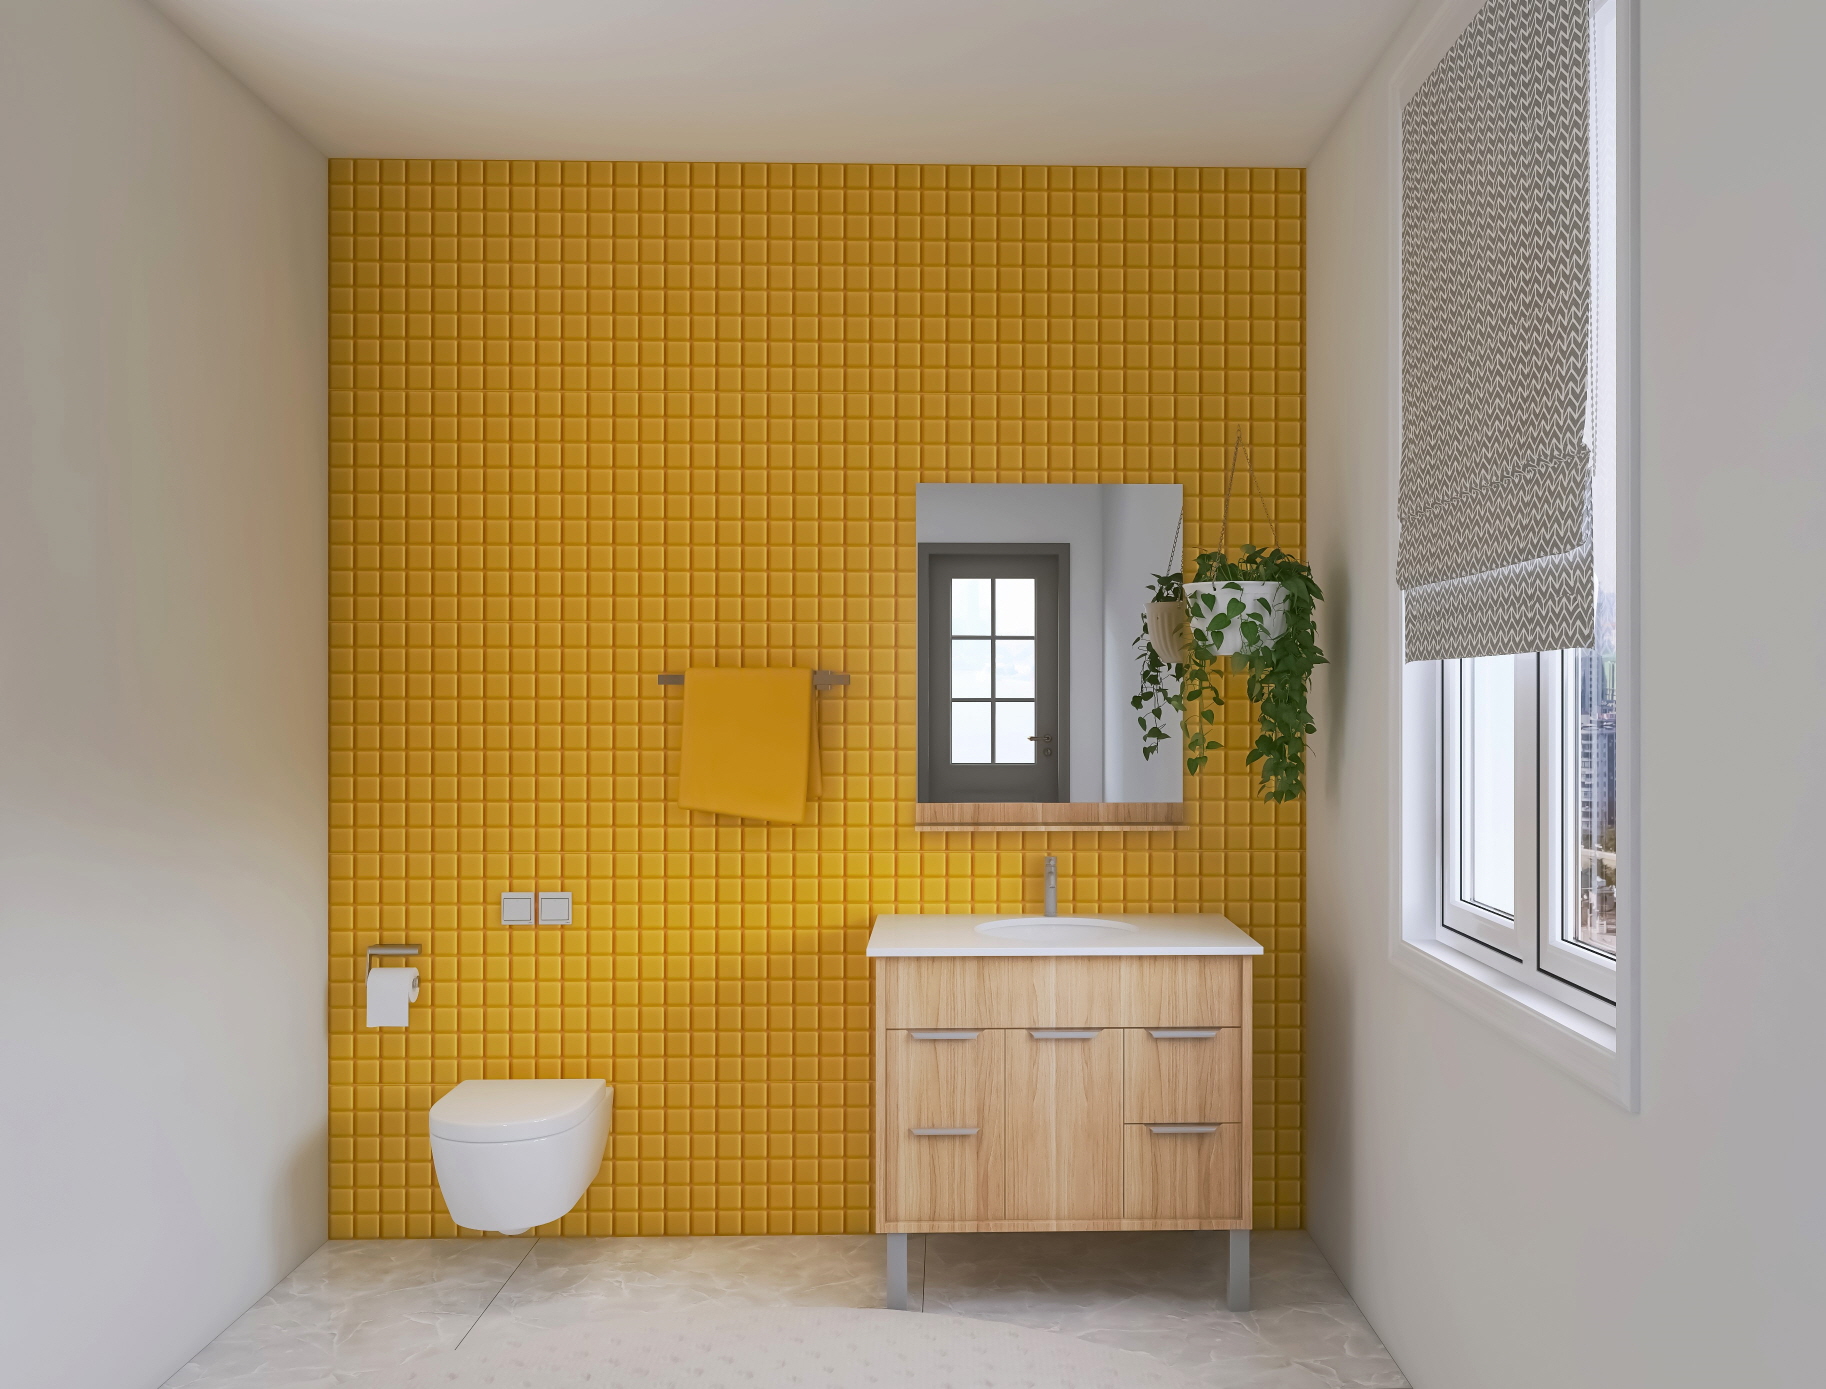 Mustard adds warmth and vibrancy to bathrooms with wood accents and earthy tones.